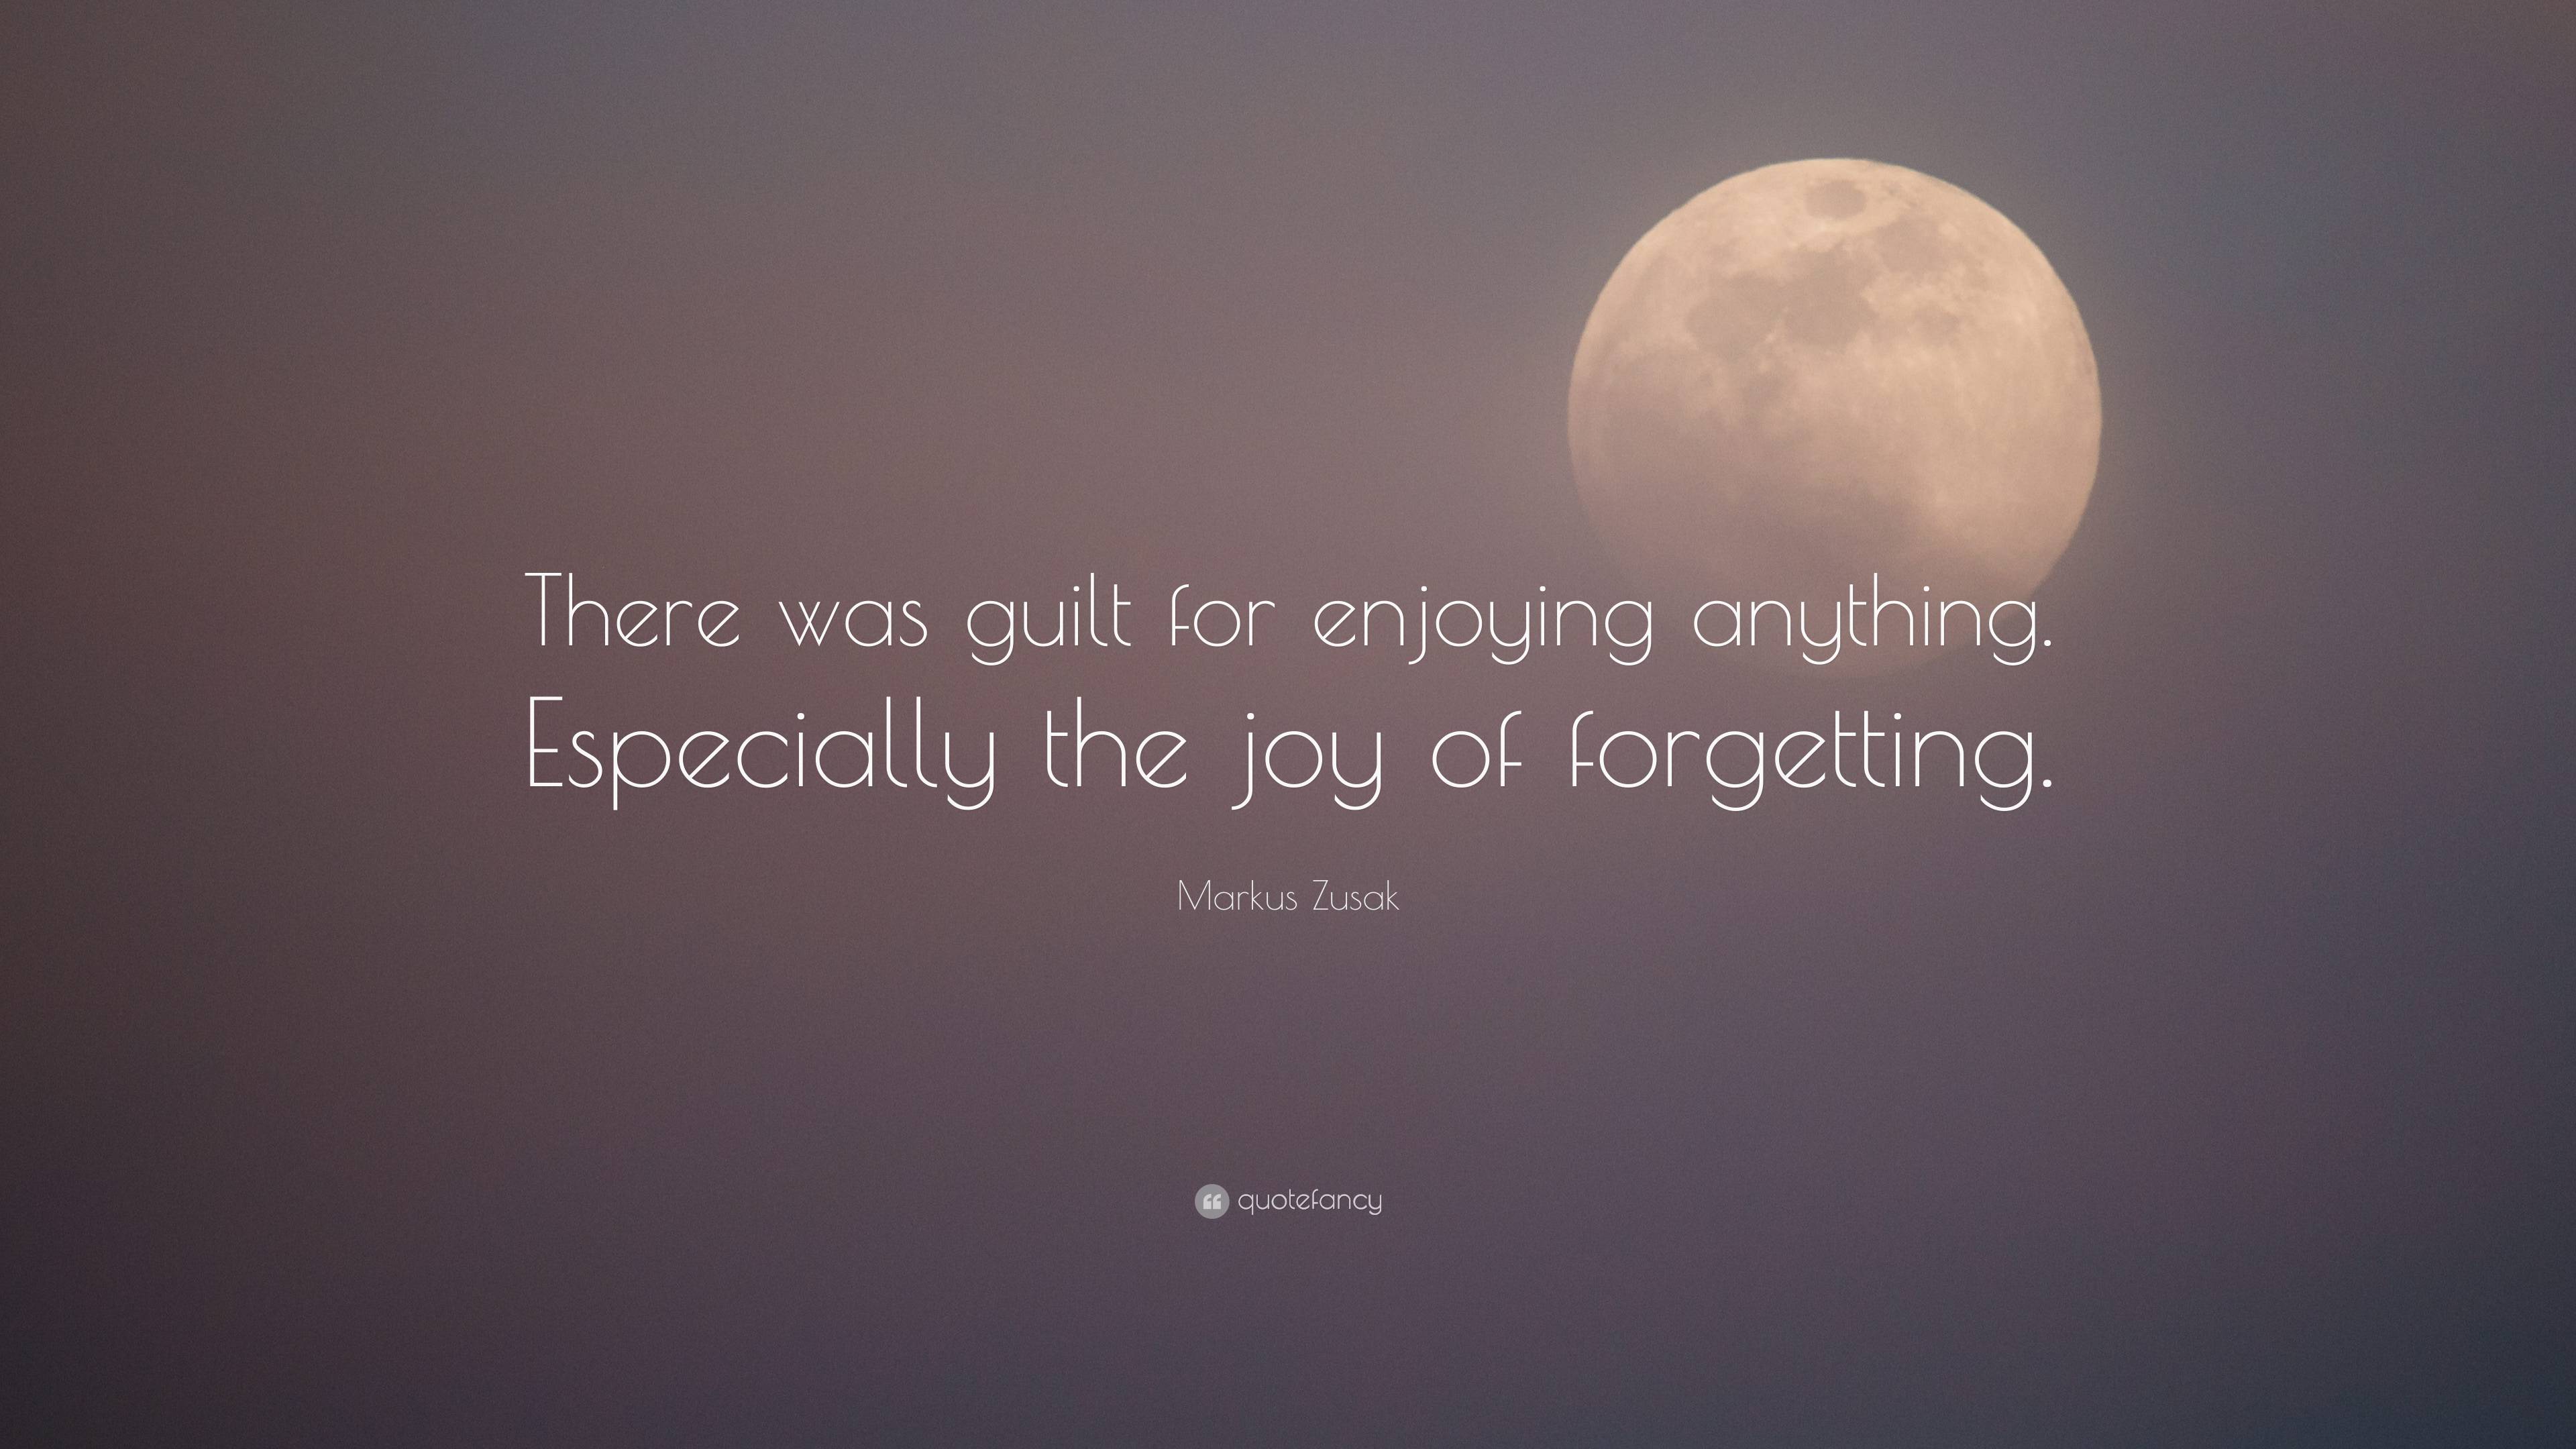 Markus Zusak Quote: “There was guilt for enjoying anything. Especially ...